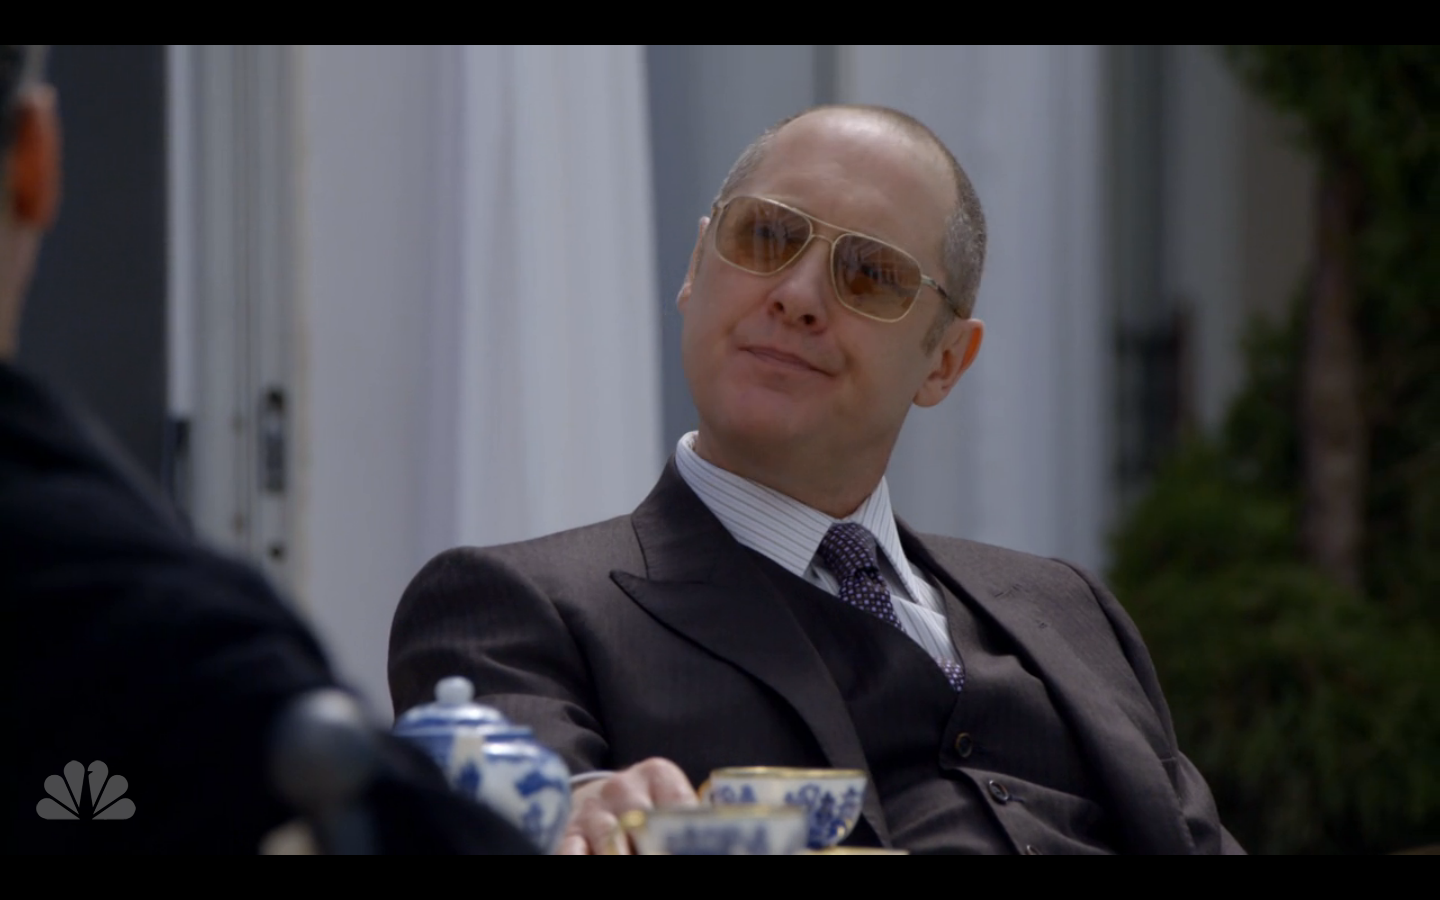 The Blacklist “The Kingmaker”. TV By The Minute